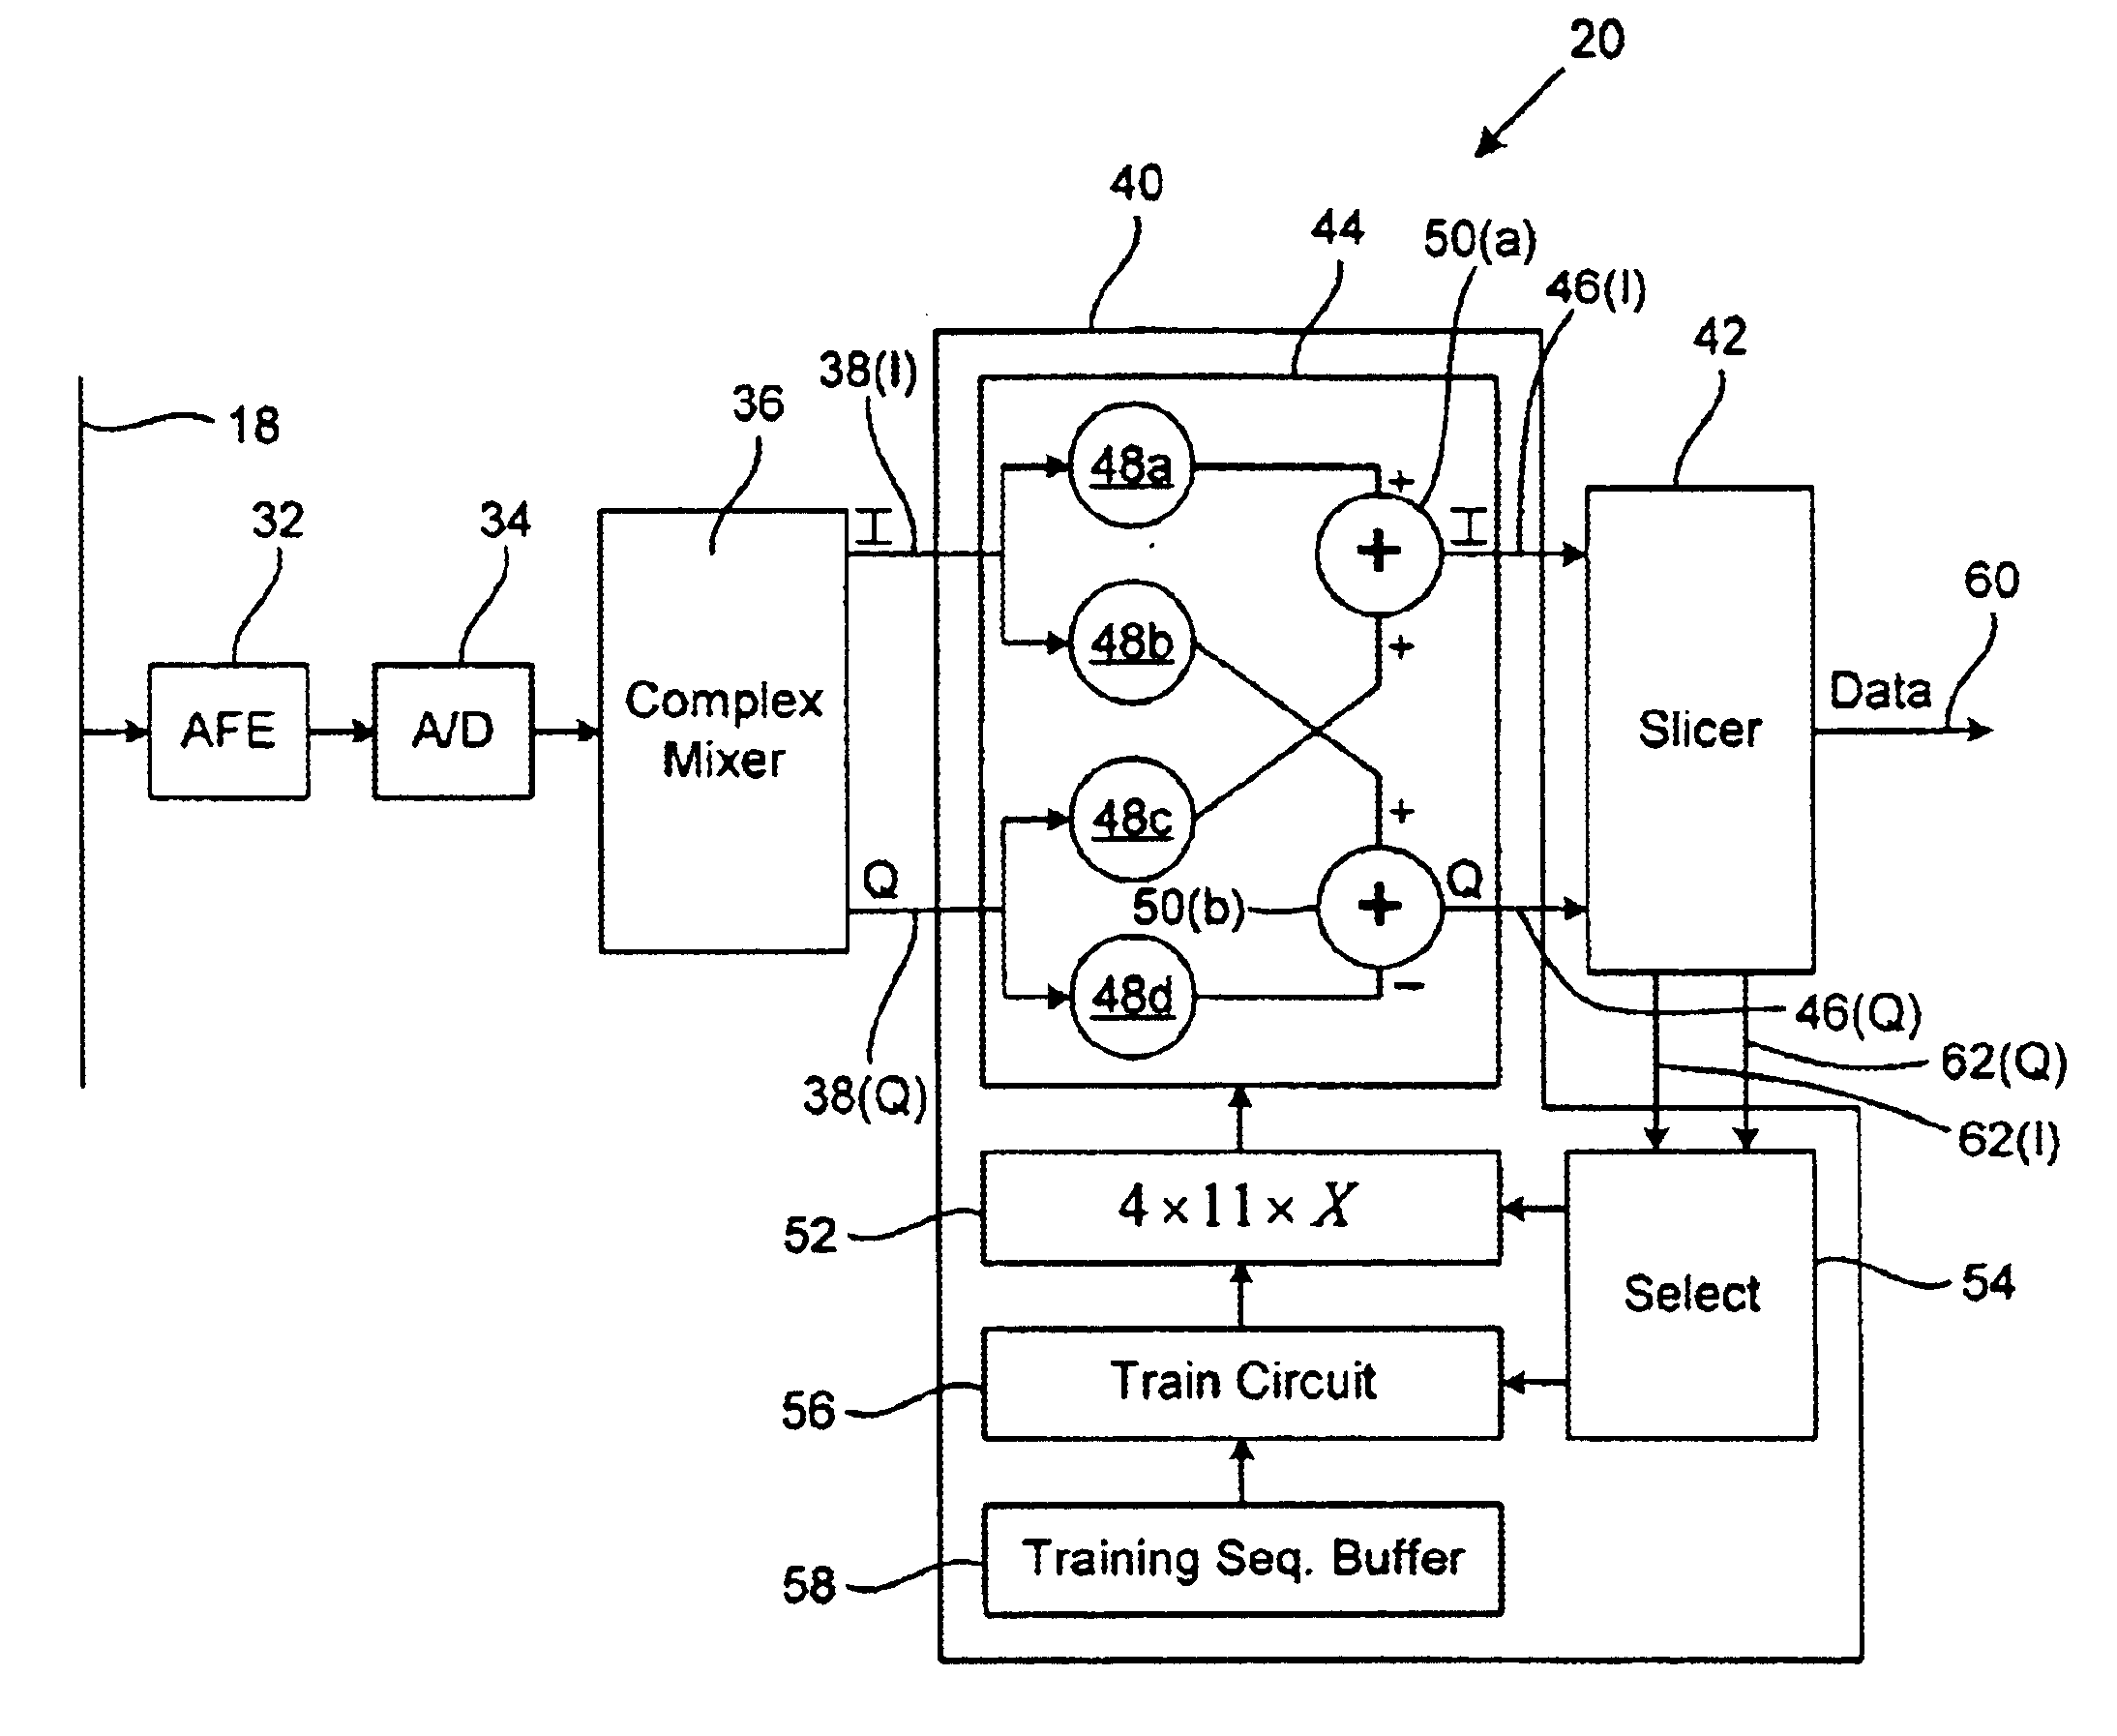 Network receiver utilizing pre-determined stored equalizer coefficients